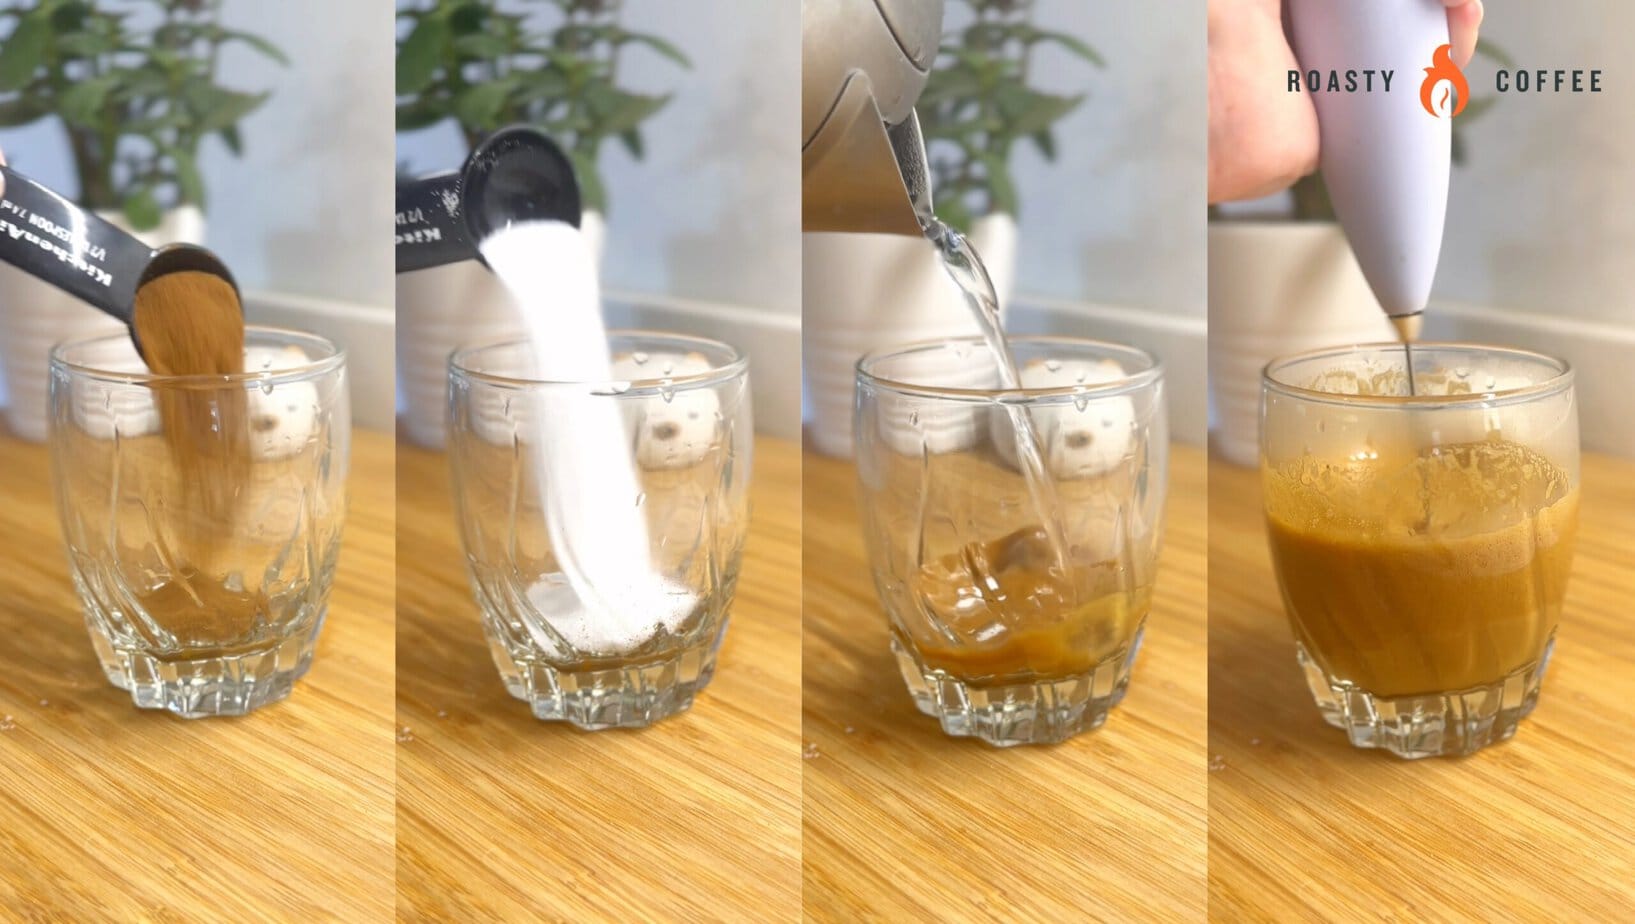 adding coffee, sugar and water to the glass